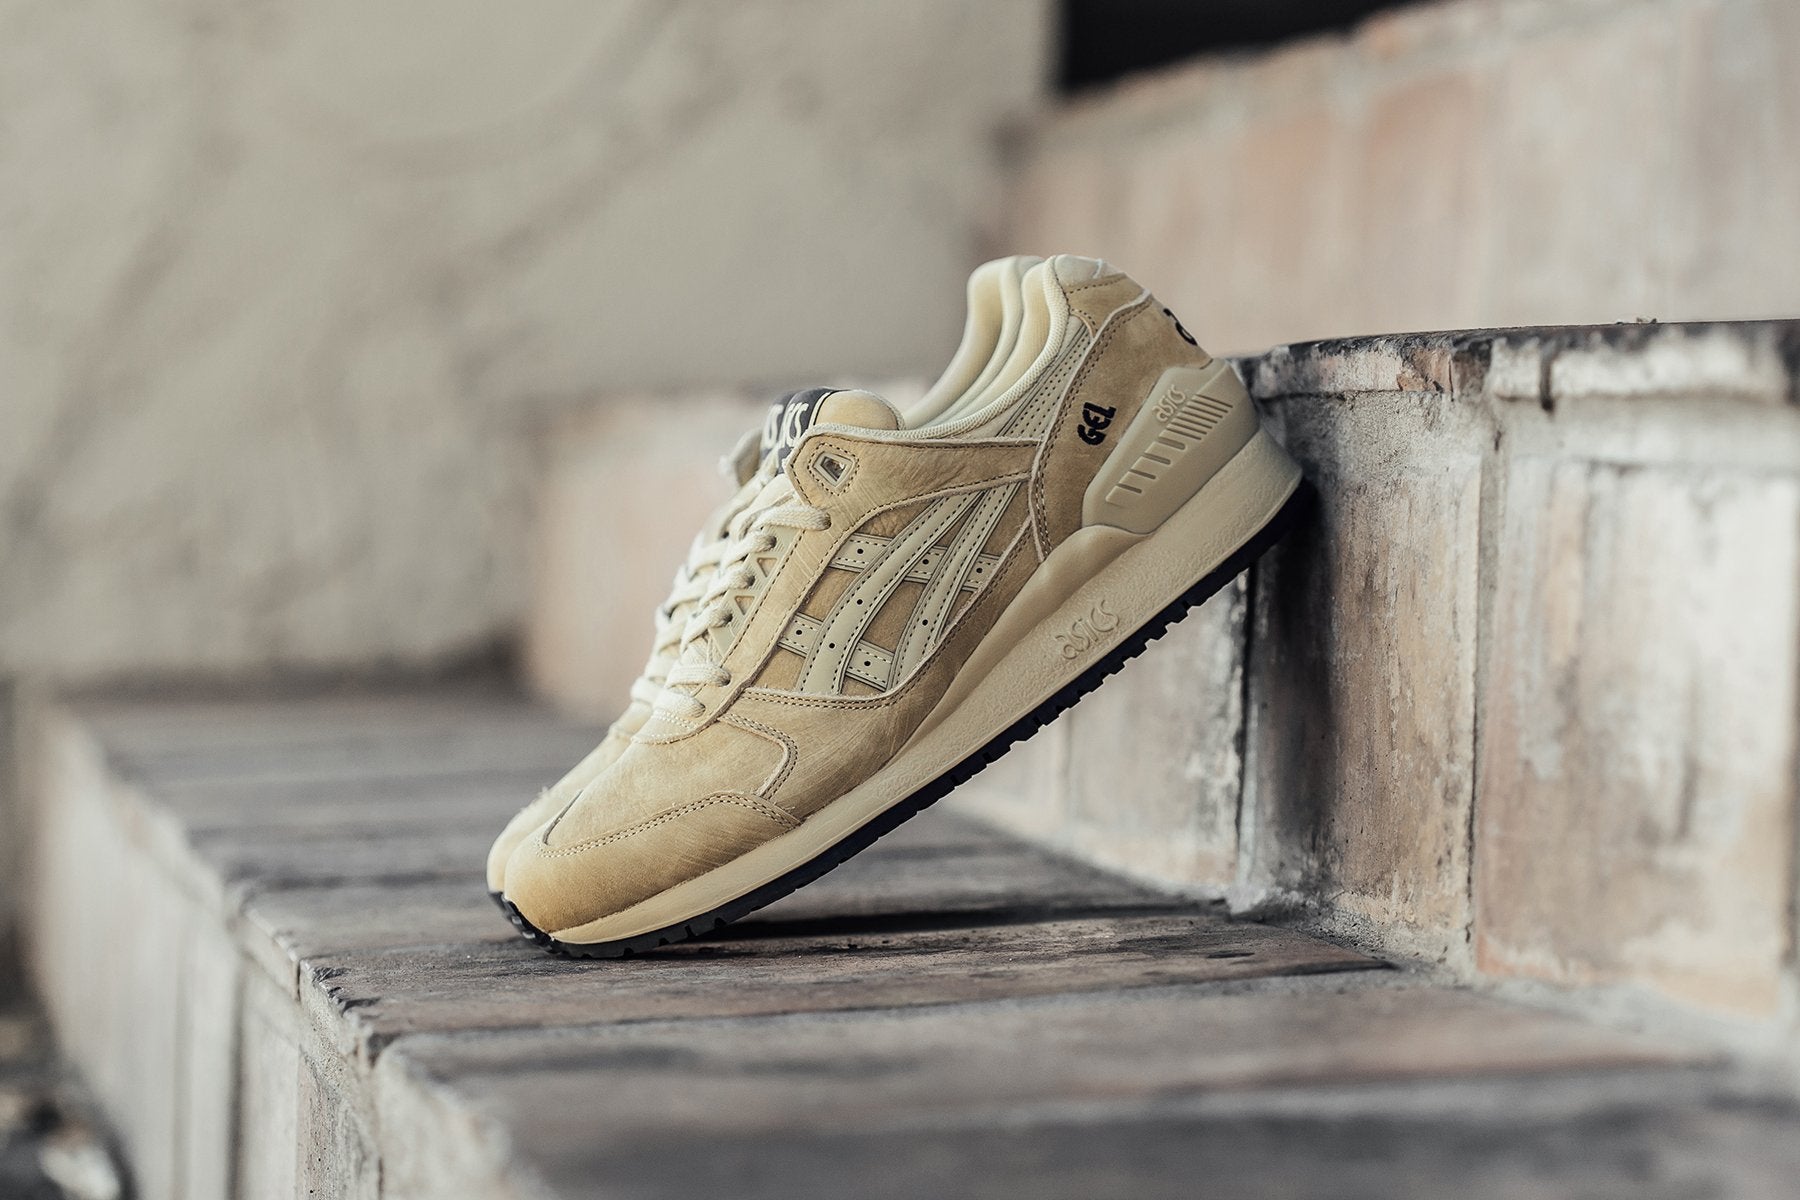 Gaseoso Buen sentimiento Cesta Asics Gel-Respector "Taos Taupe" Available Now – Feature